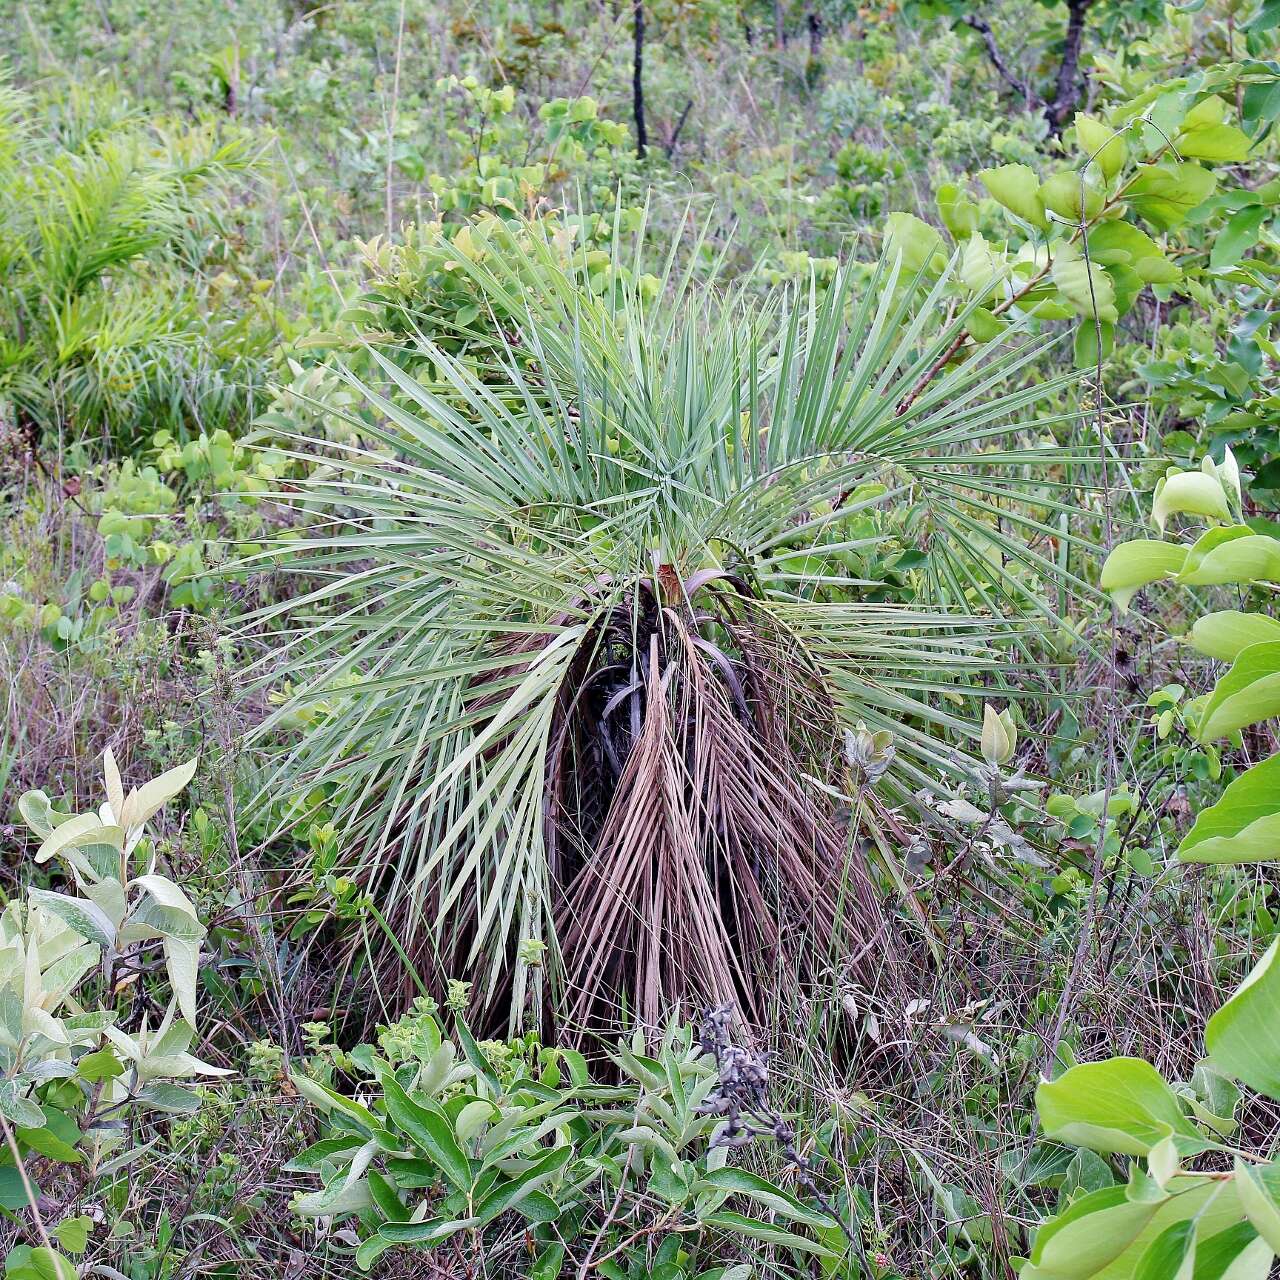 Image of jelly palm